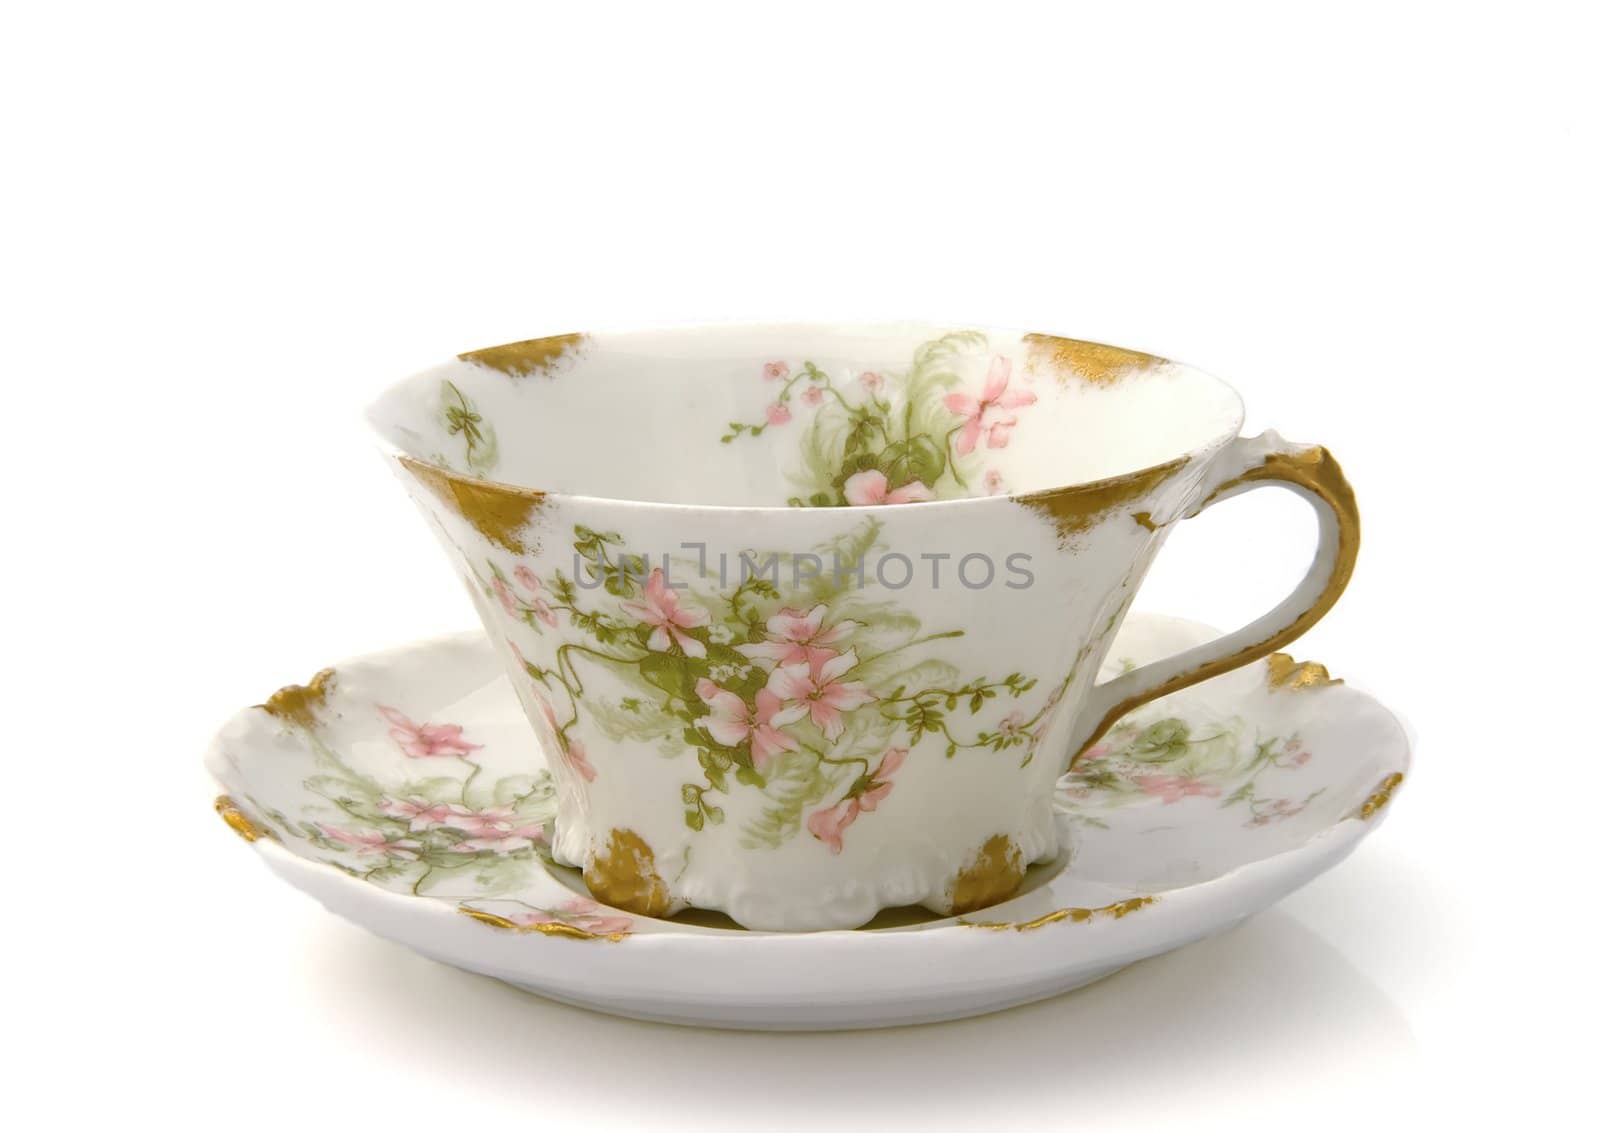 Antique teacup and saucer with a floral pattern isolated on white 